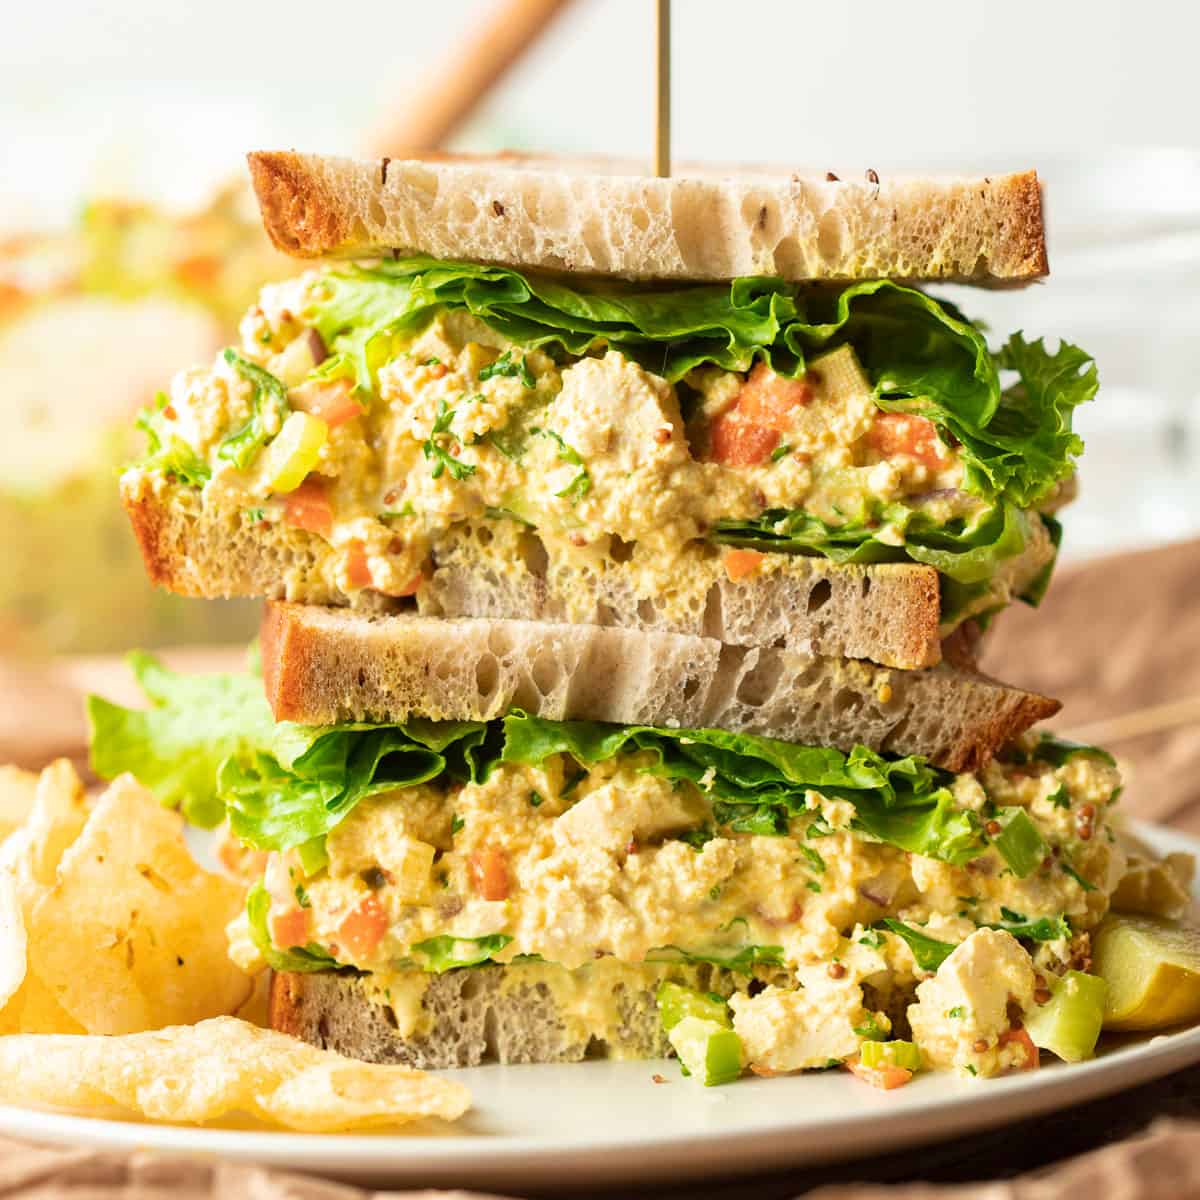 Two halves of a Vegan Egg Salad sandwich stacked on a plate.